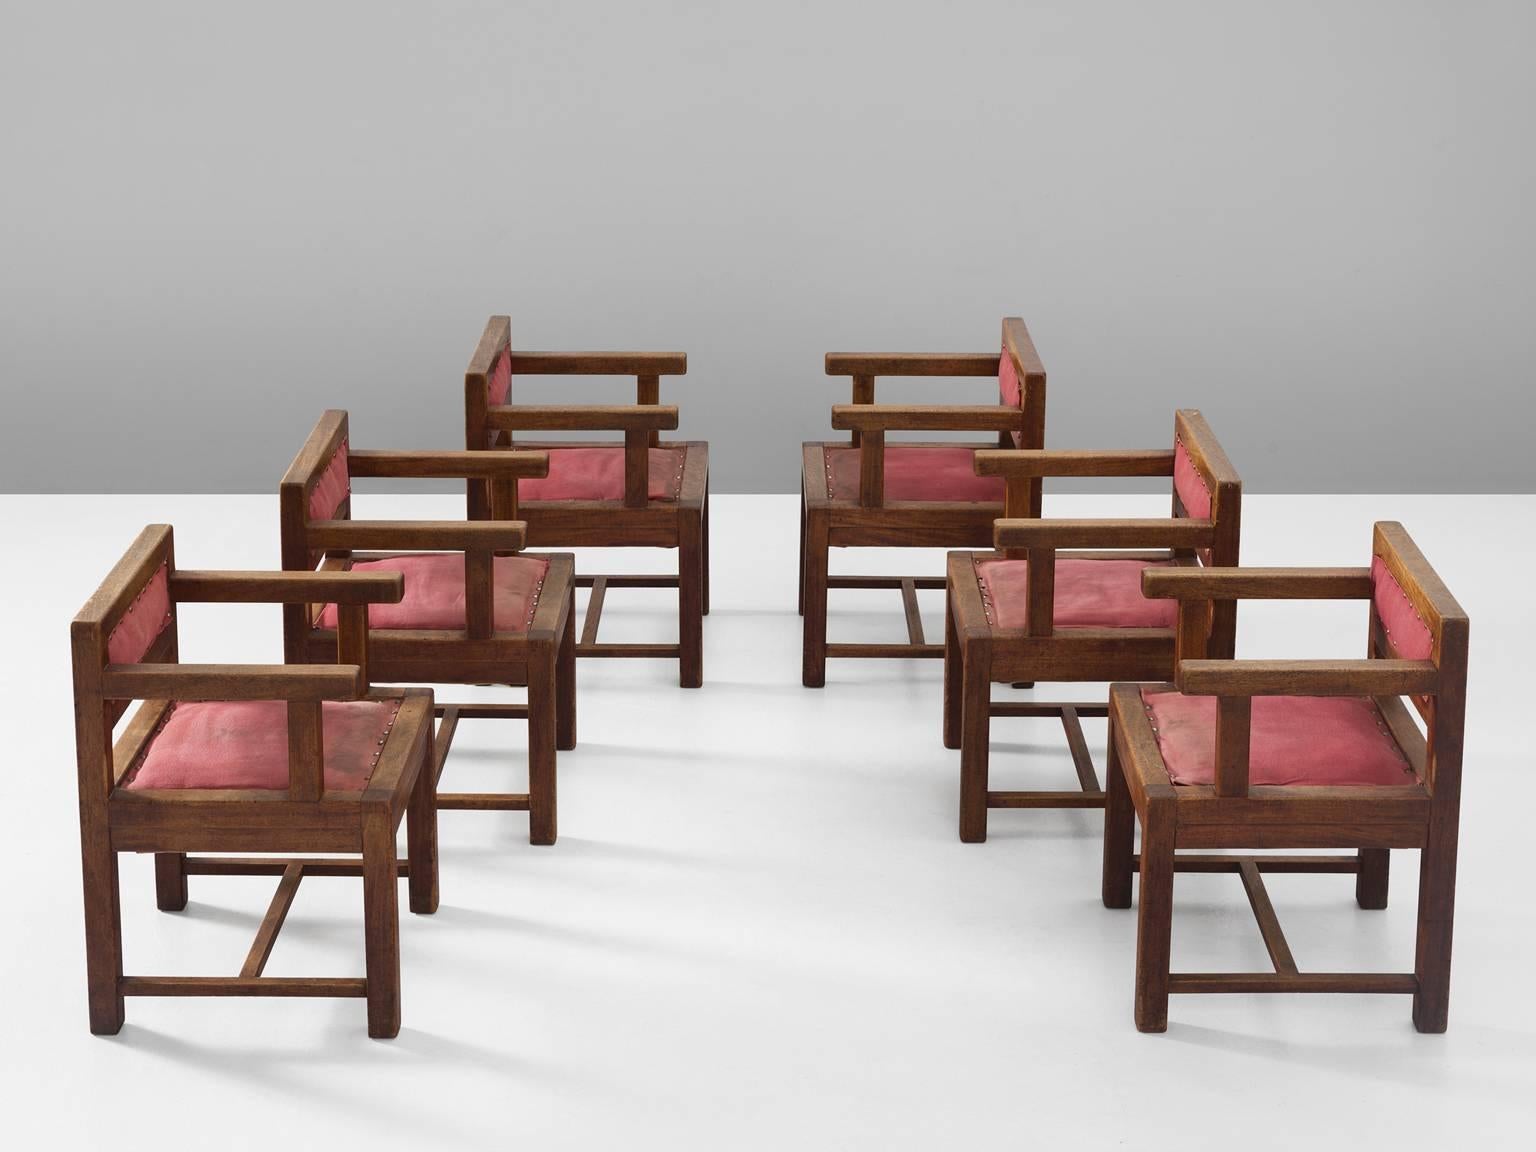 Set of six armchairs, in mahogany and fabric, attributed to Sarah Lipska, France, 1930s.

Set of six cubic dining chairs in mahogany with red fabric upholstery. These chairs have a clear design of straight lines. No diagonals or curves, just